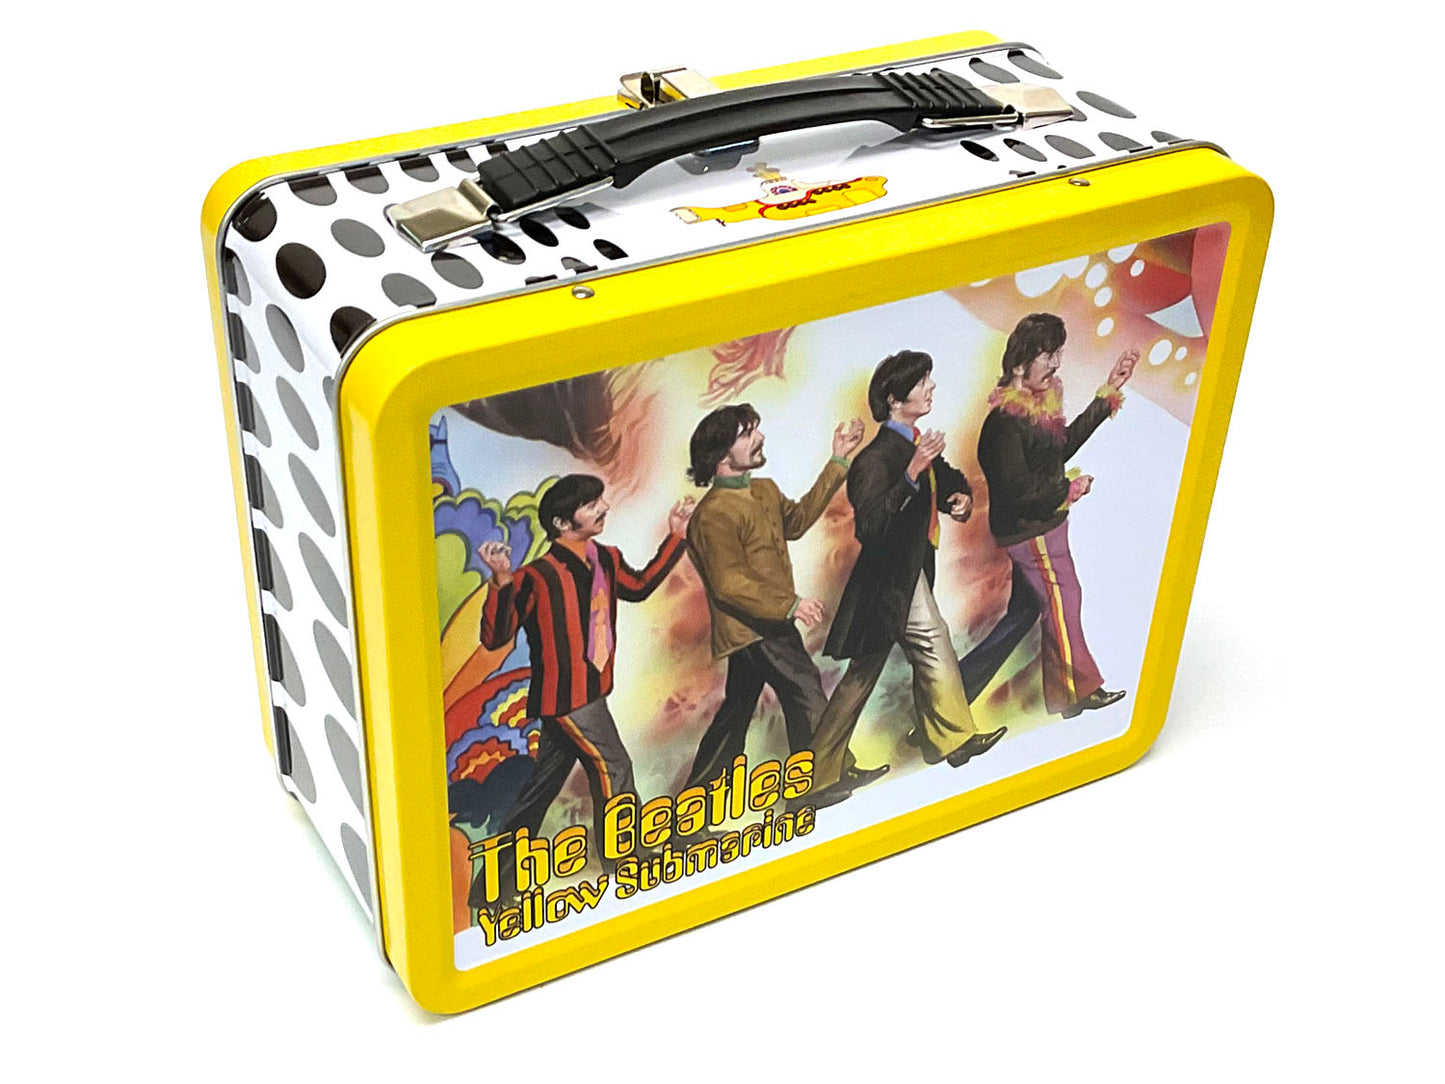 Lunch Box - The Beatles Yellow Submarine - back